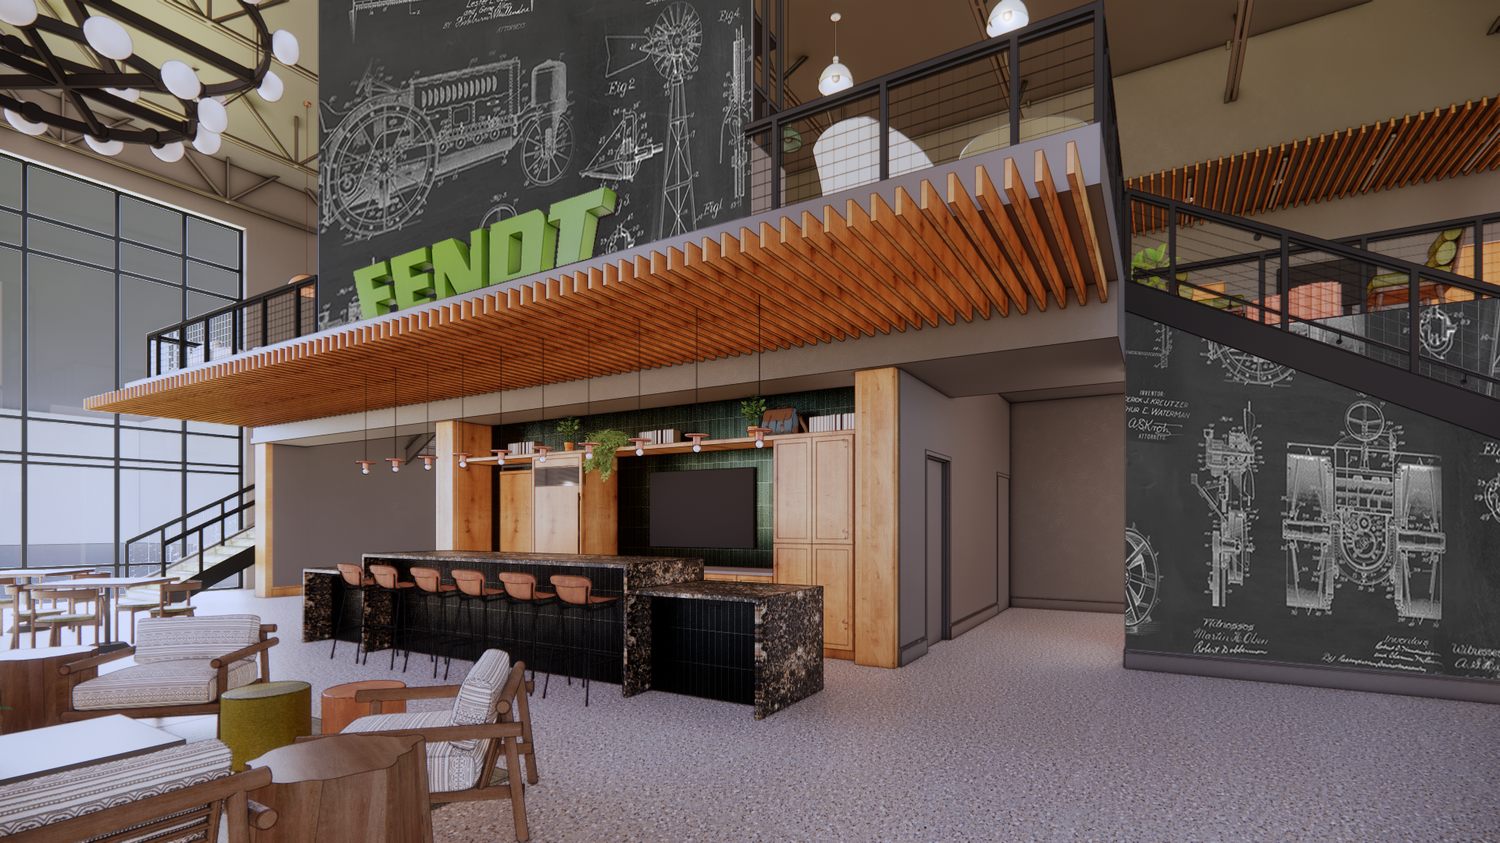 AGCO's Jackson, Minnesota, Facility to Become Home of Fendt in North America with the Fendt Lodge Customer Experience Center